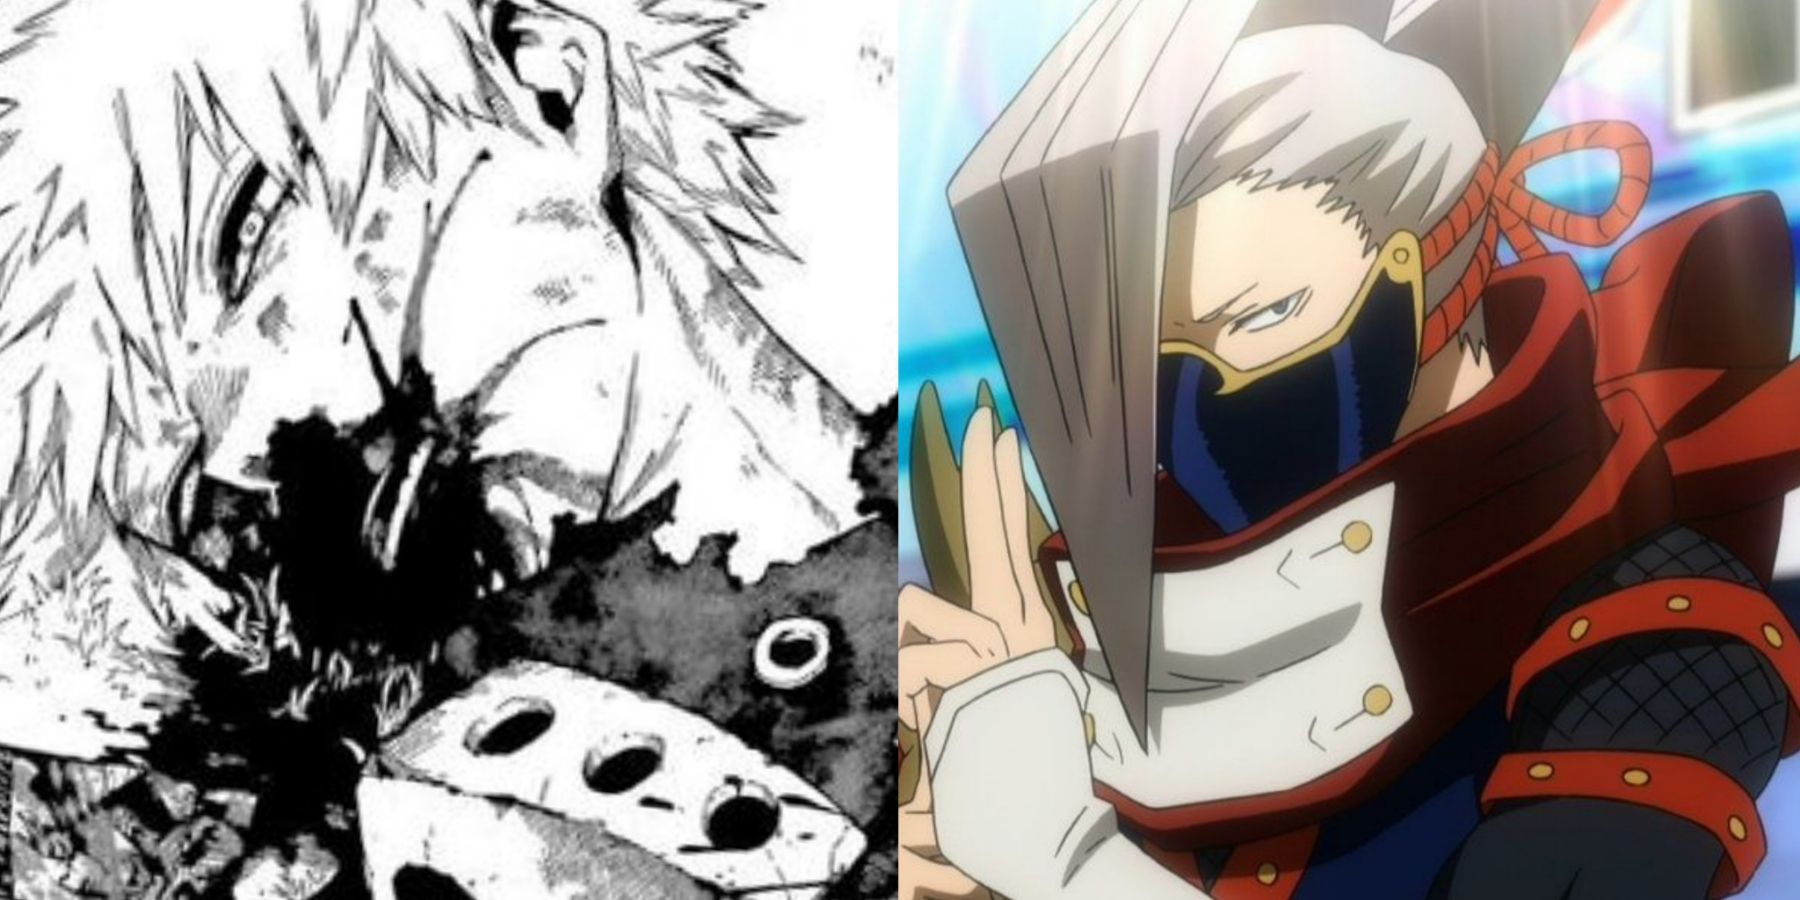 Bakugo's Death in My Hero Academia Could Make the Series Legendary